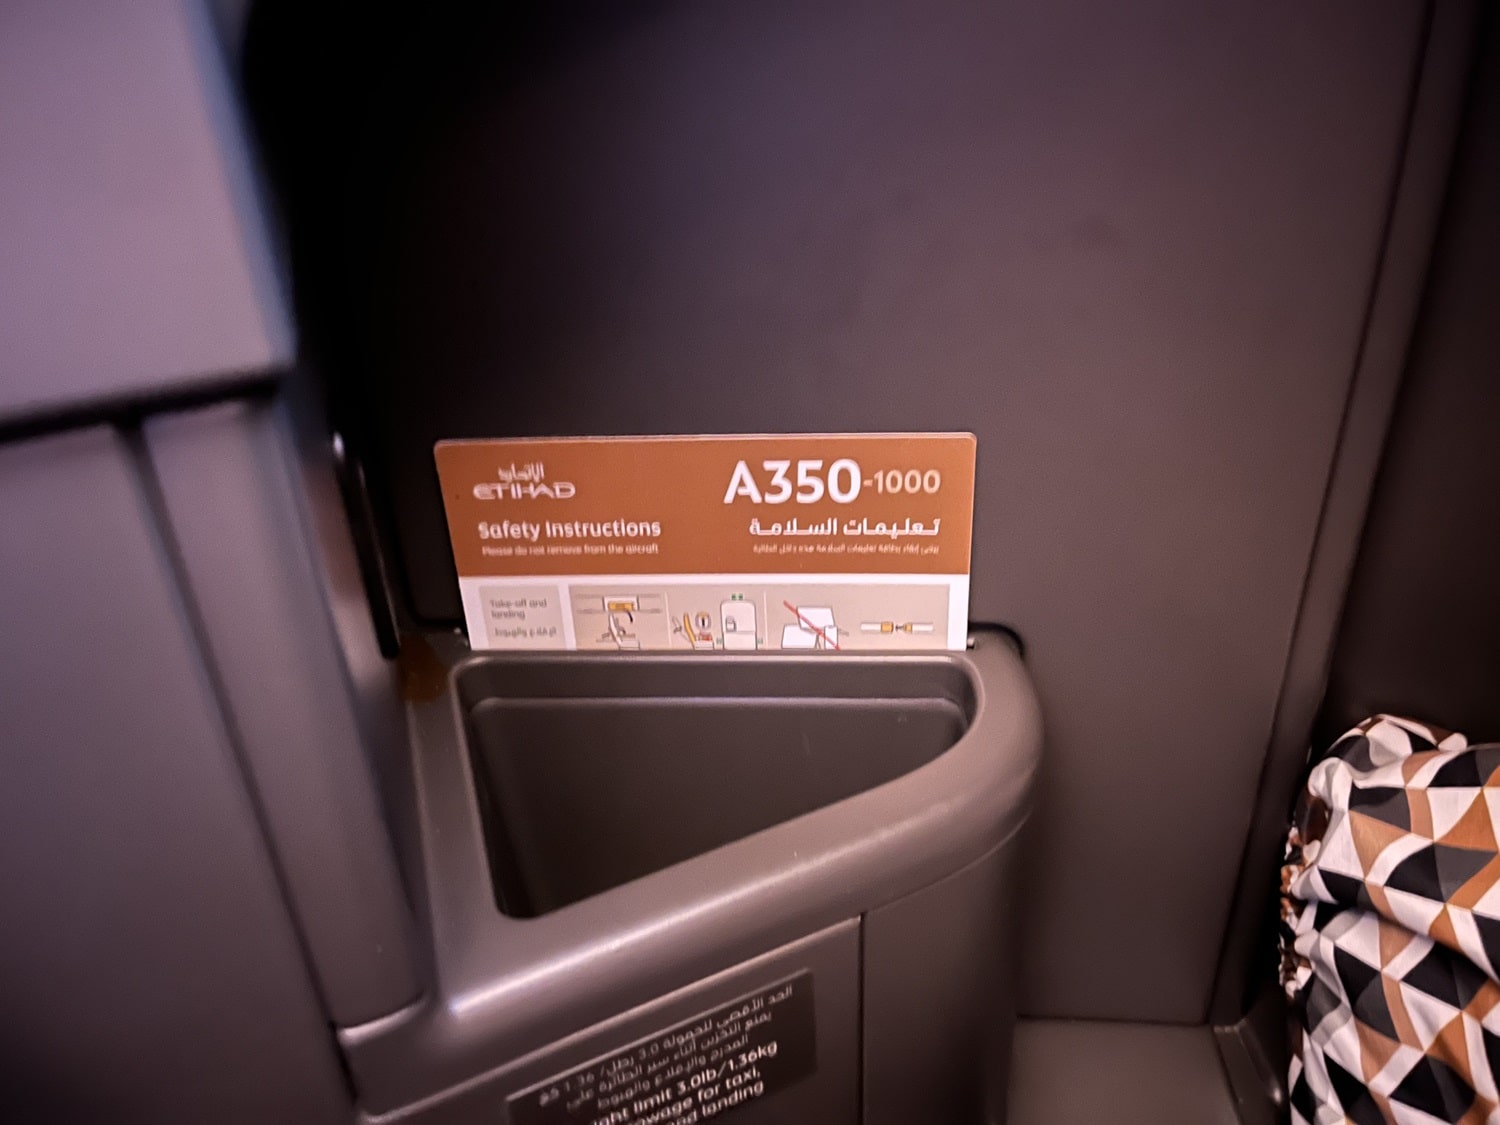 etihad airways business class a350 seat storage with safety card